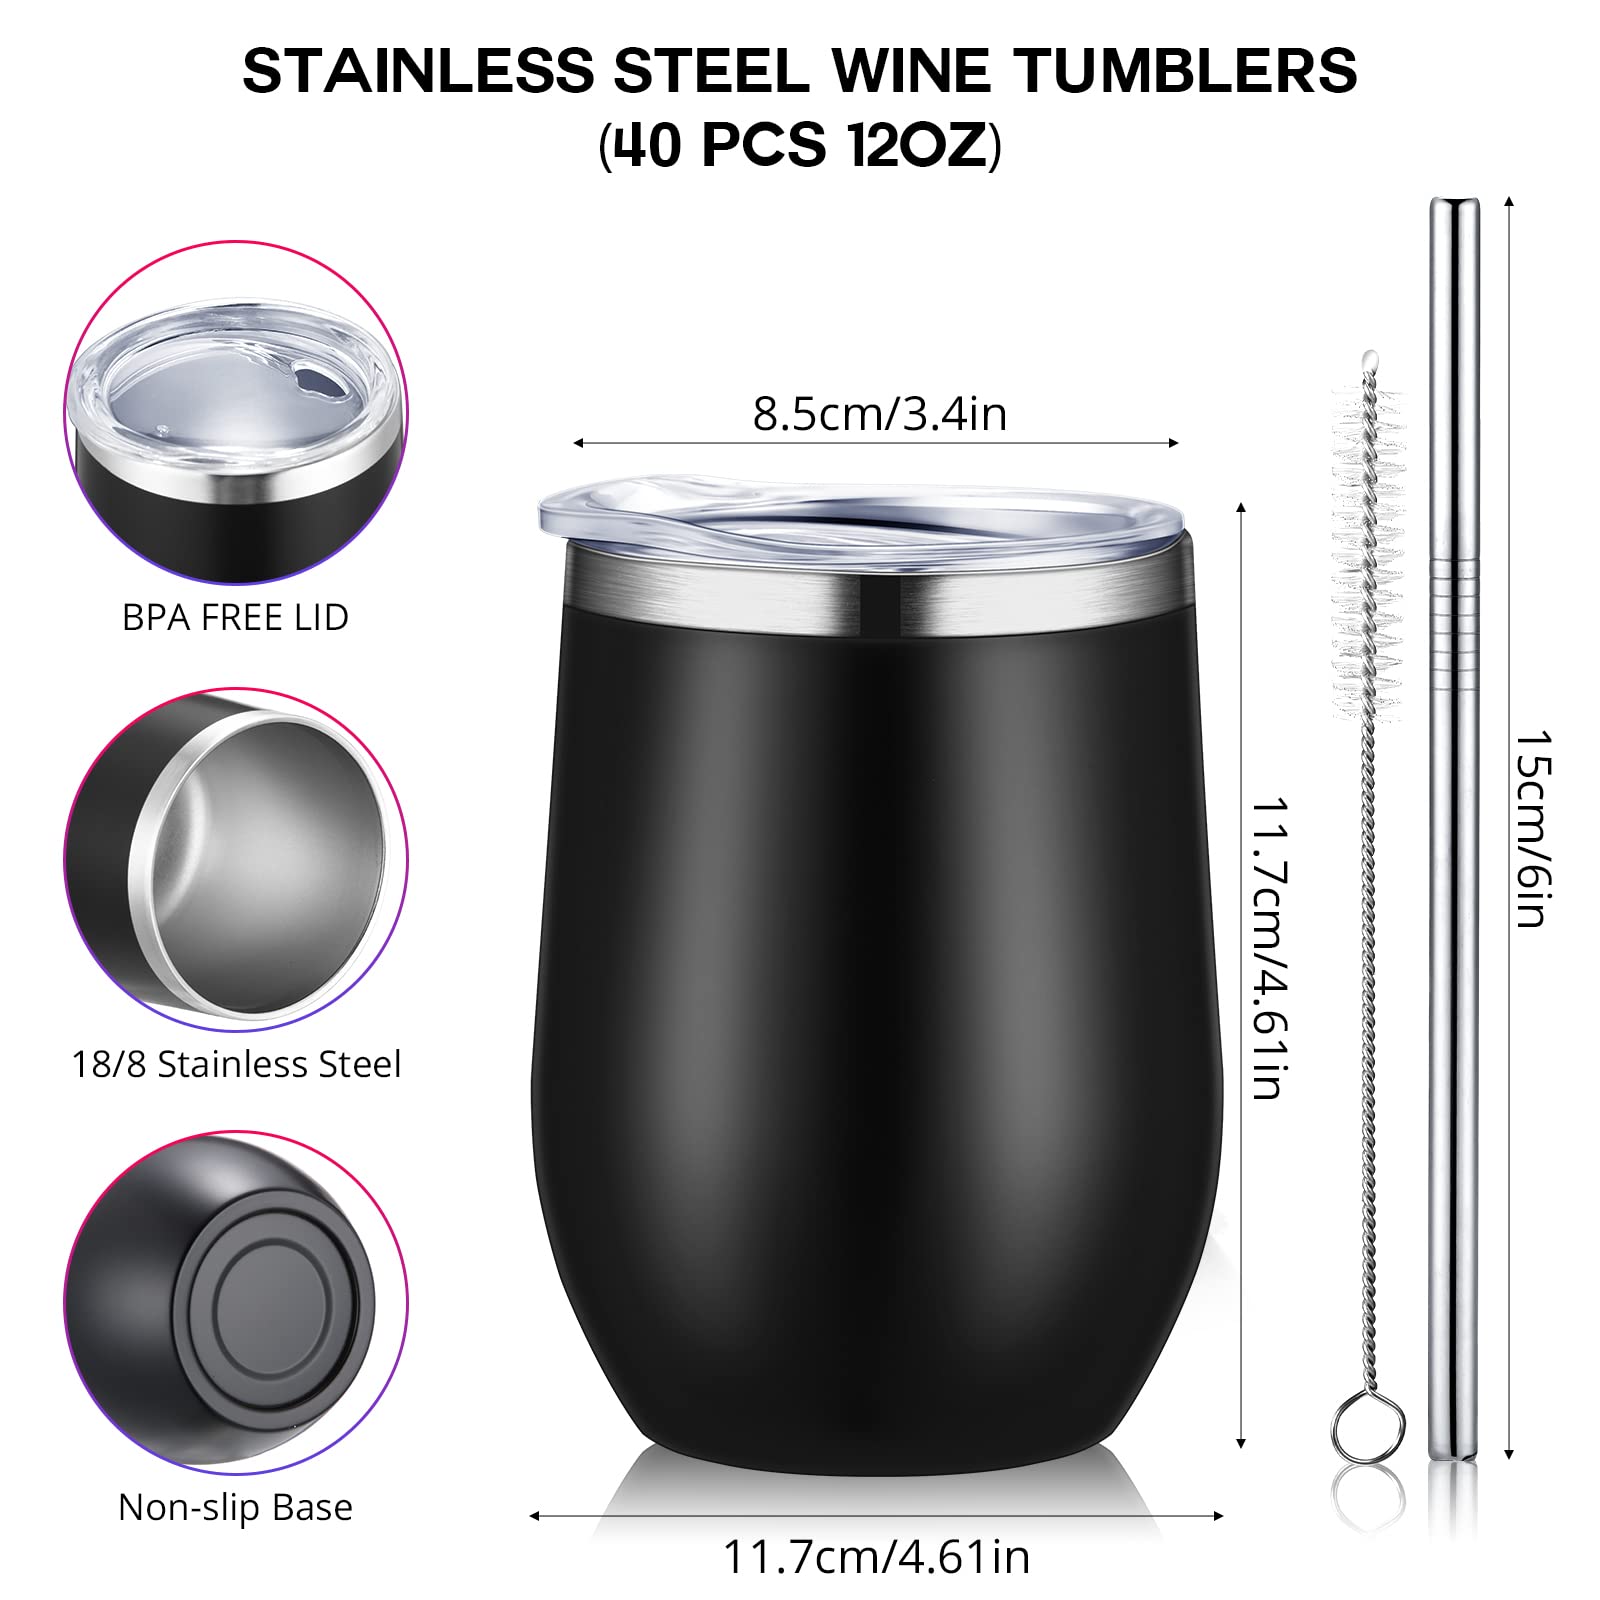 Sieral 40 Pack Insulated Wine Tumbler 12 oz Stainless Steel Wine Glasses Bulk with Lids Straws Double Wall Vacuum Cups Stemless Coffee Cup Nurse Week Gift for Coworker Lover(White)